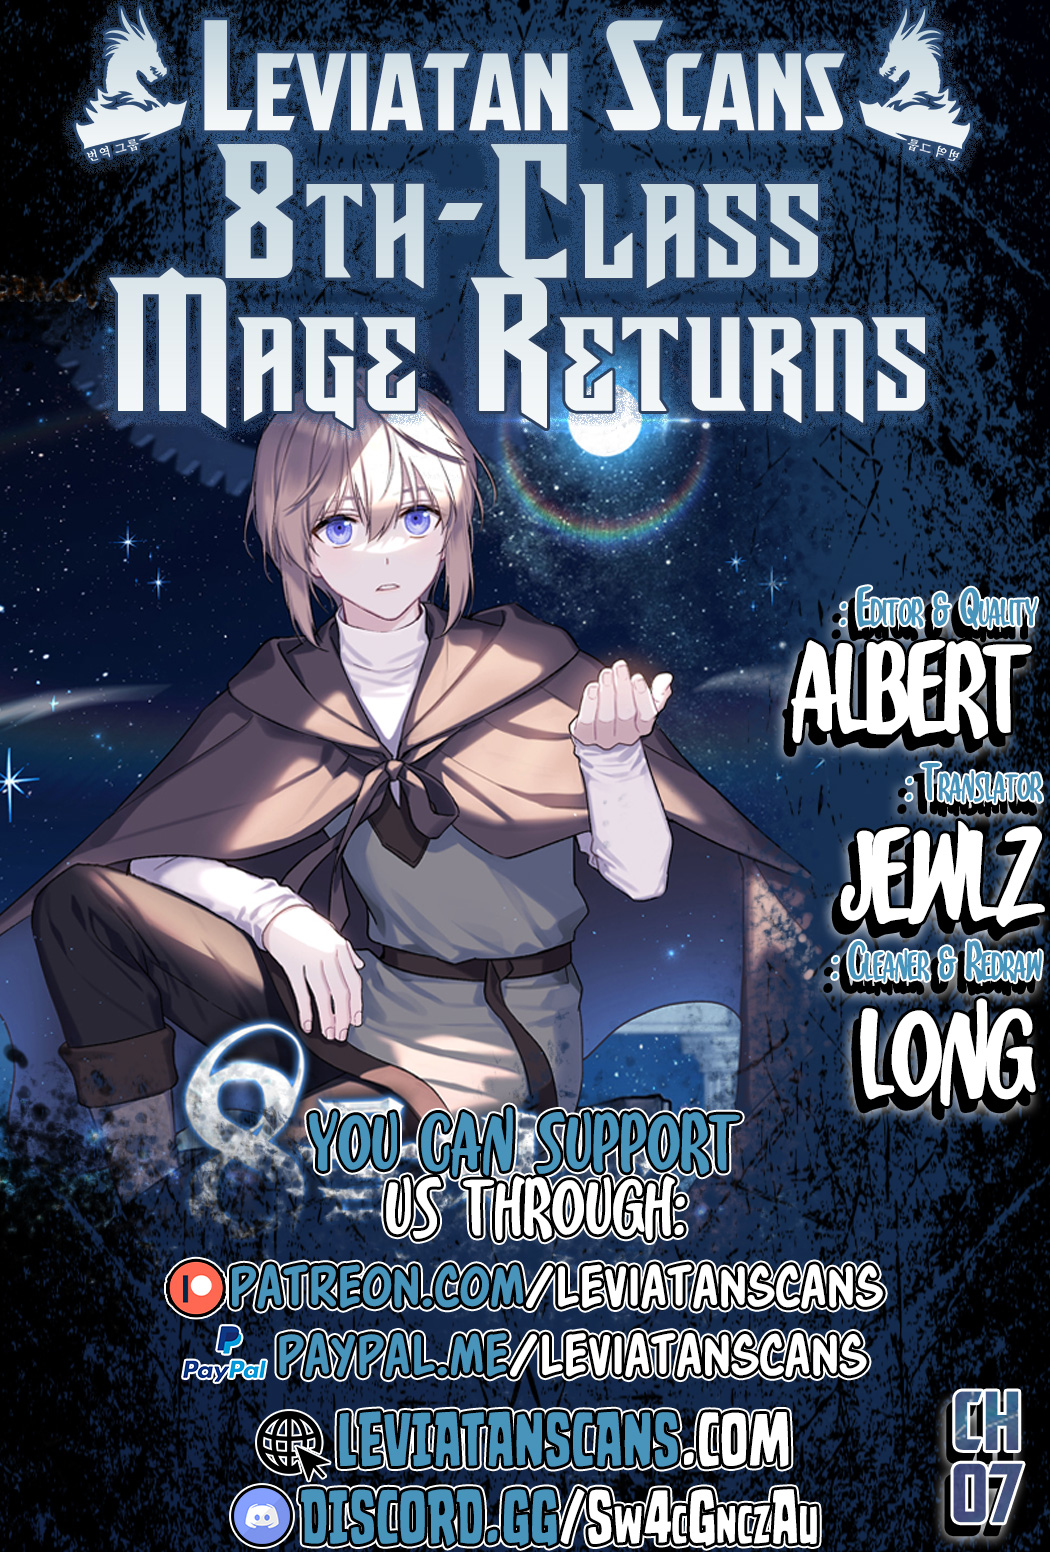 Return of the 8th Class Magician - Chapter 7126 - Image 1